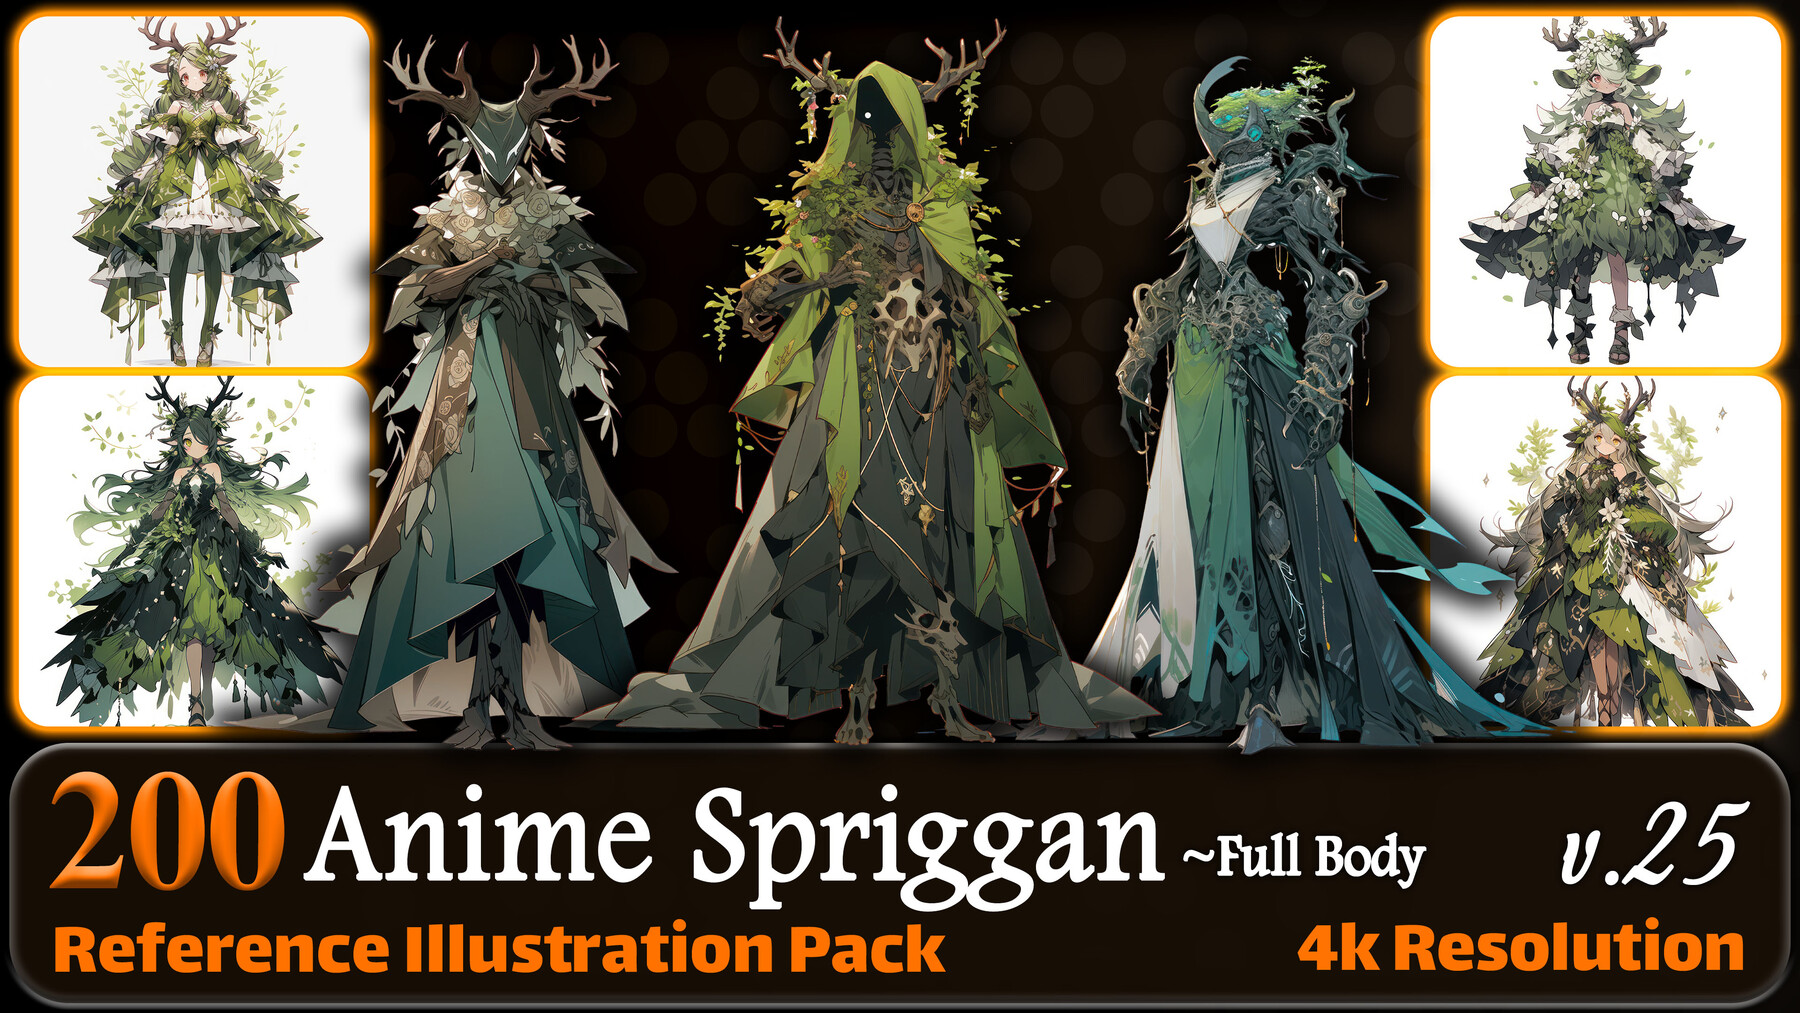 Spriggan Posters for Sale